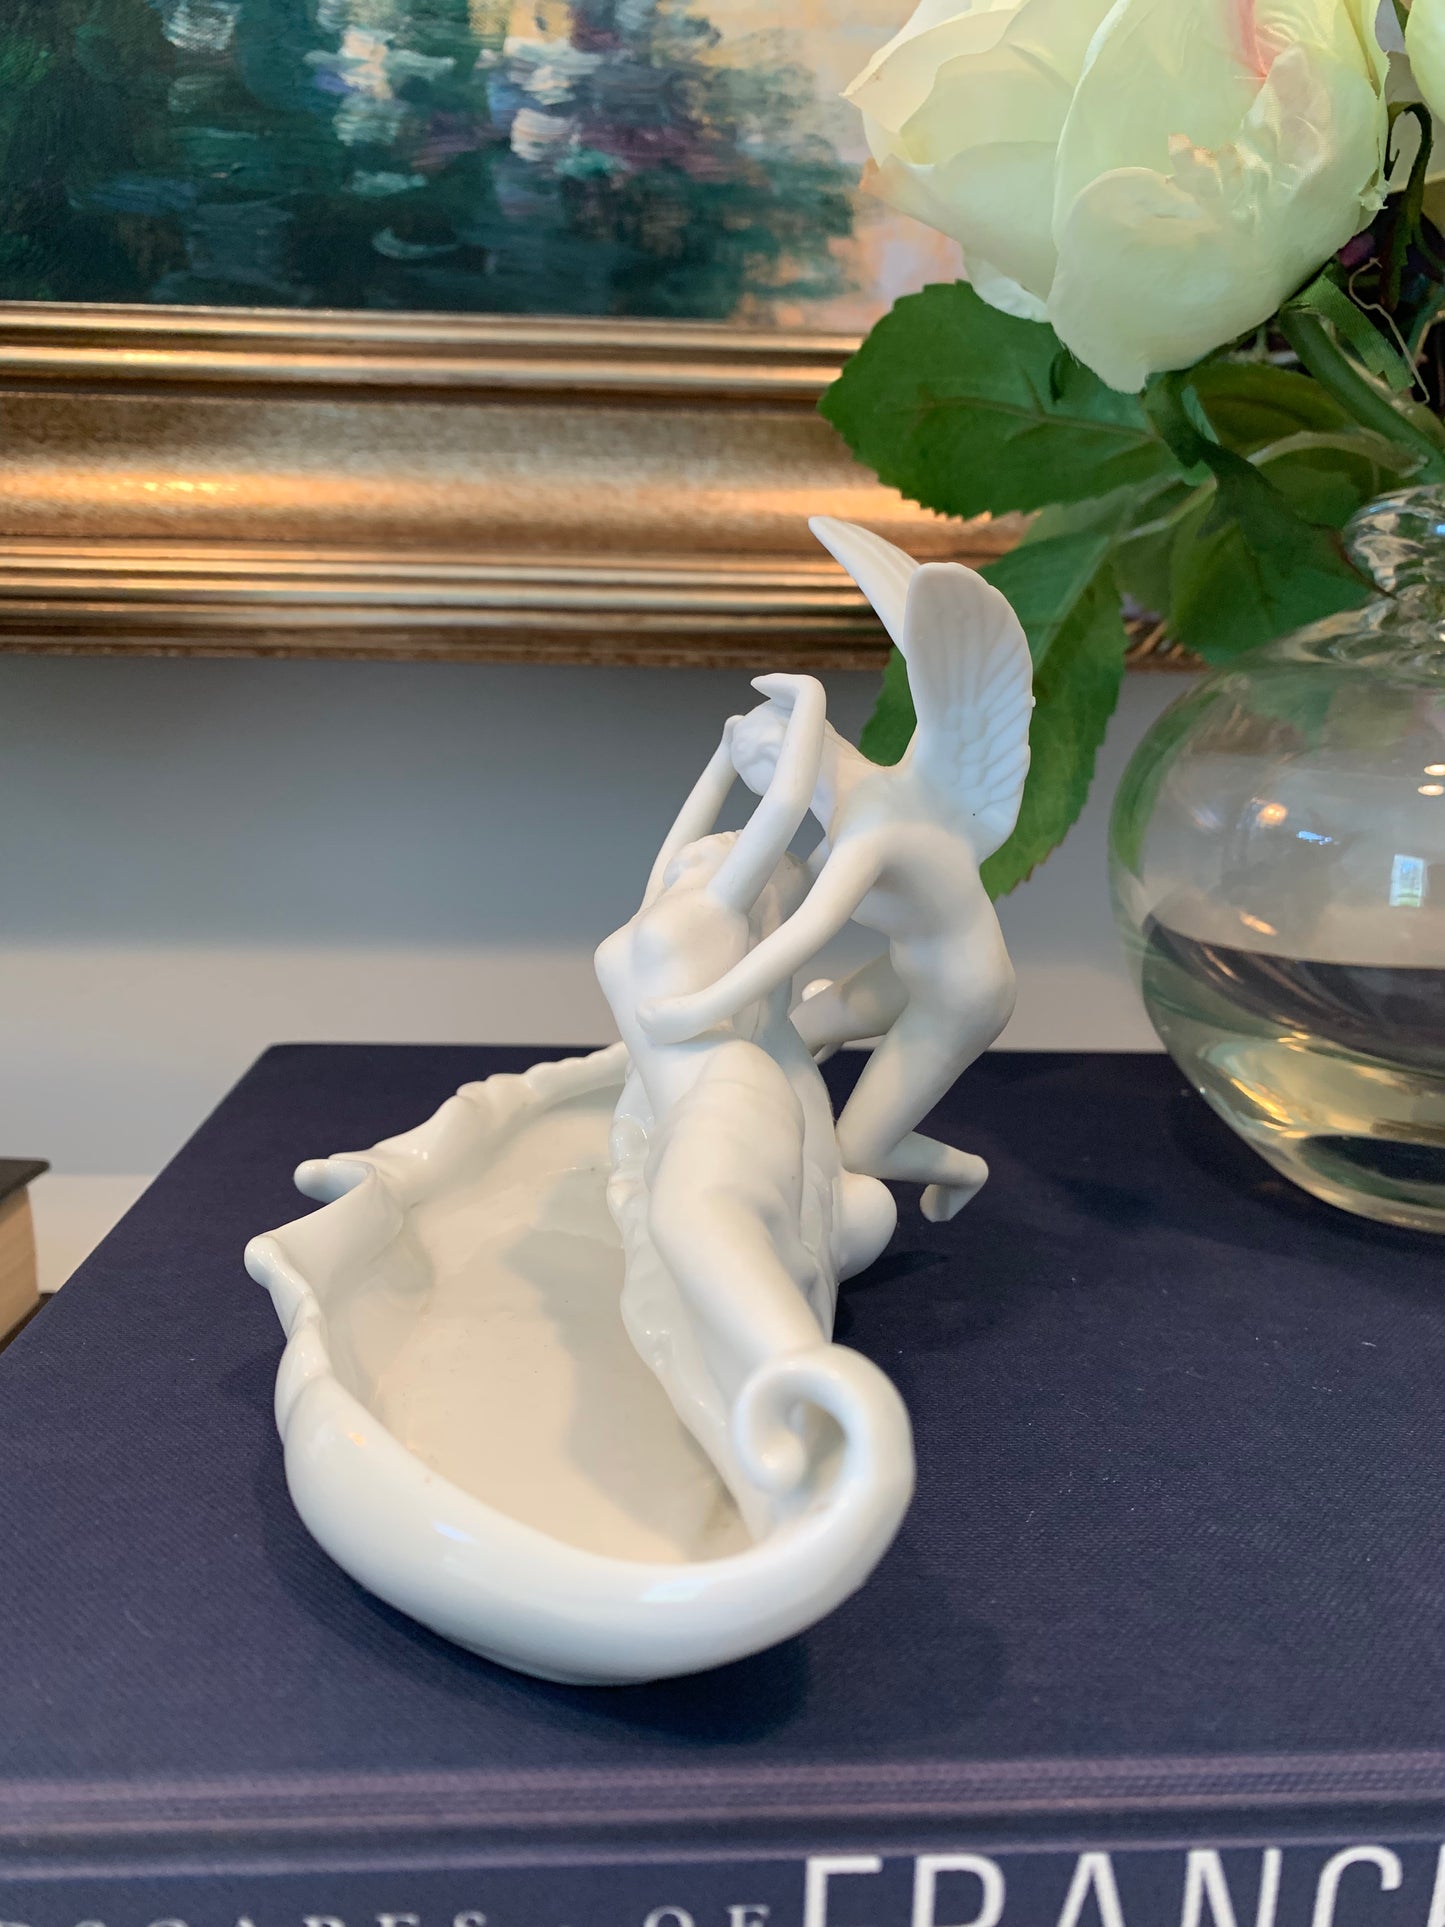 Psyche revived by Cupid's Kiss Porcelain Dish